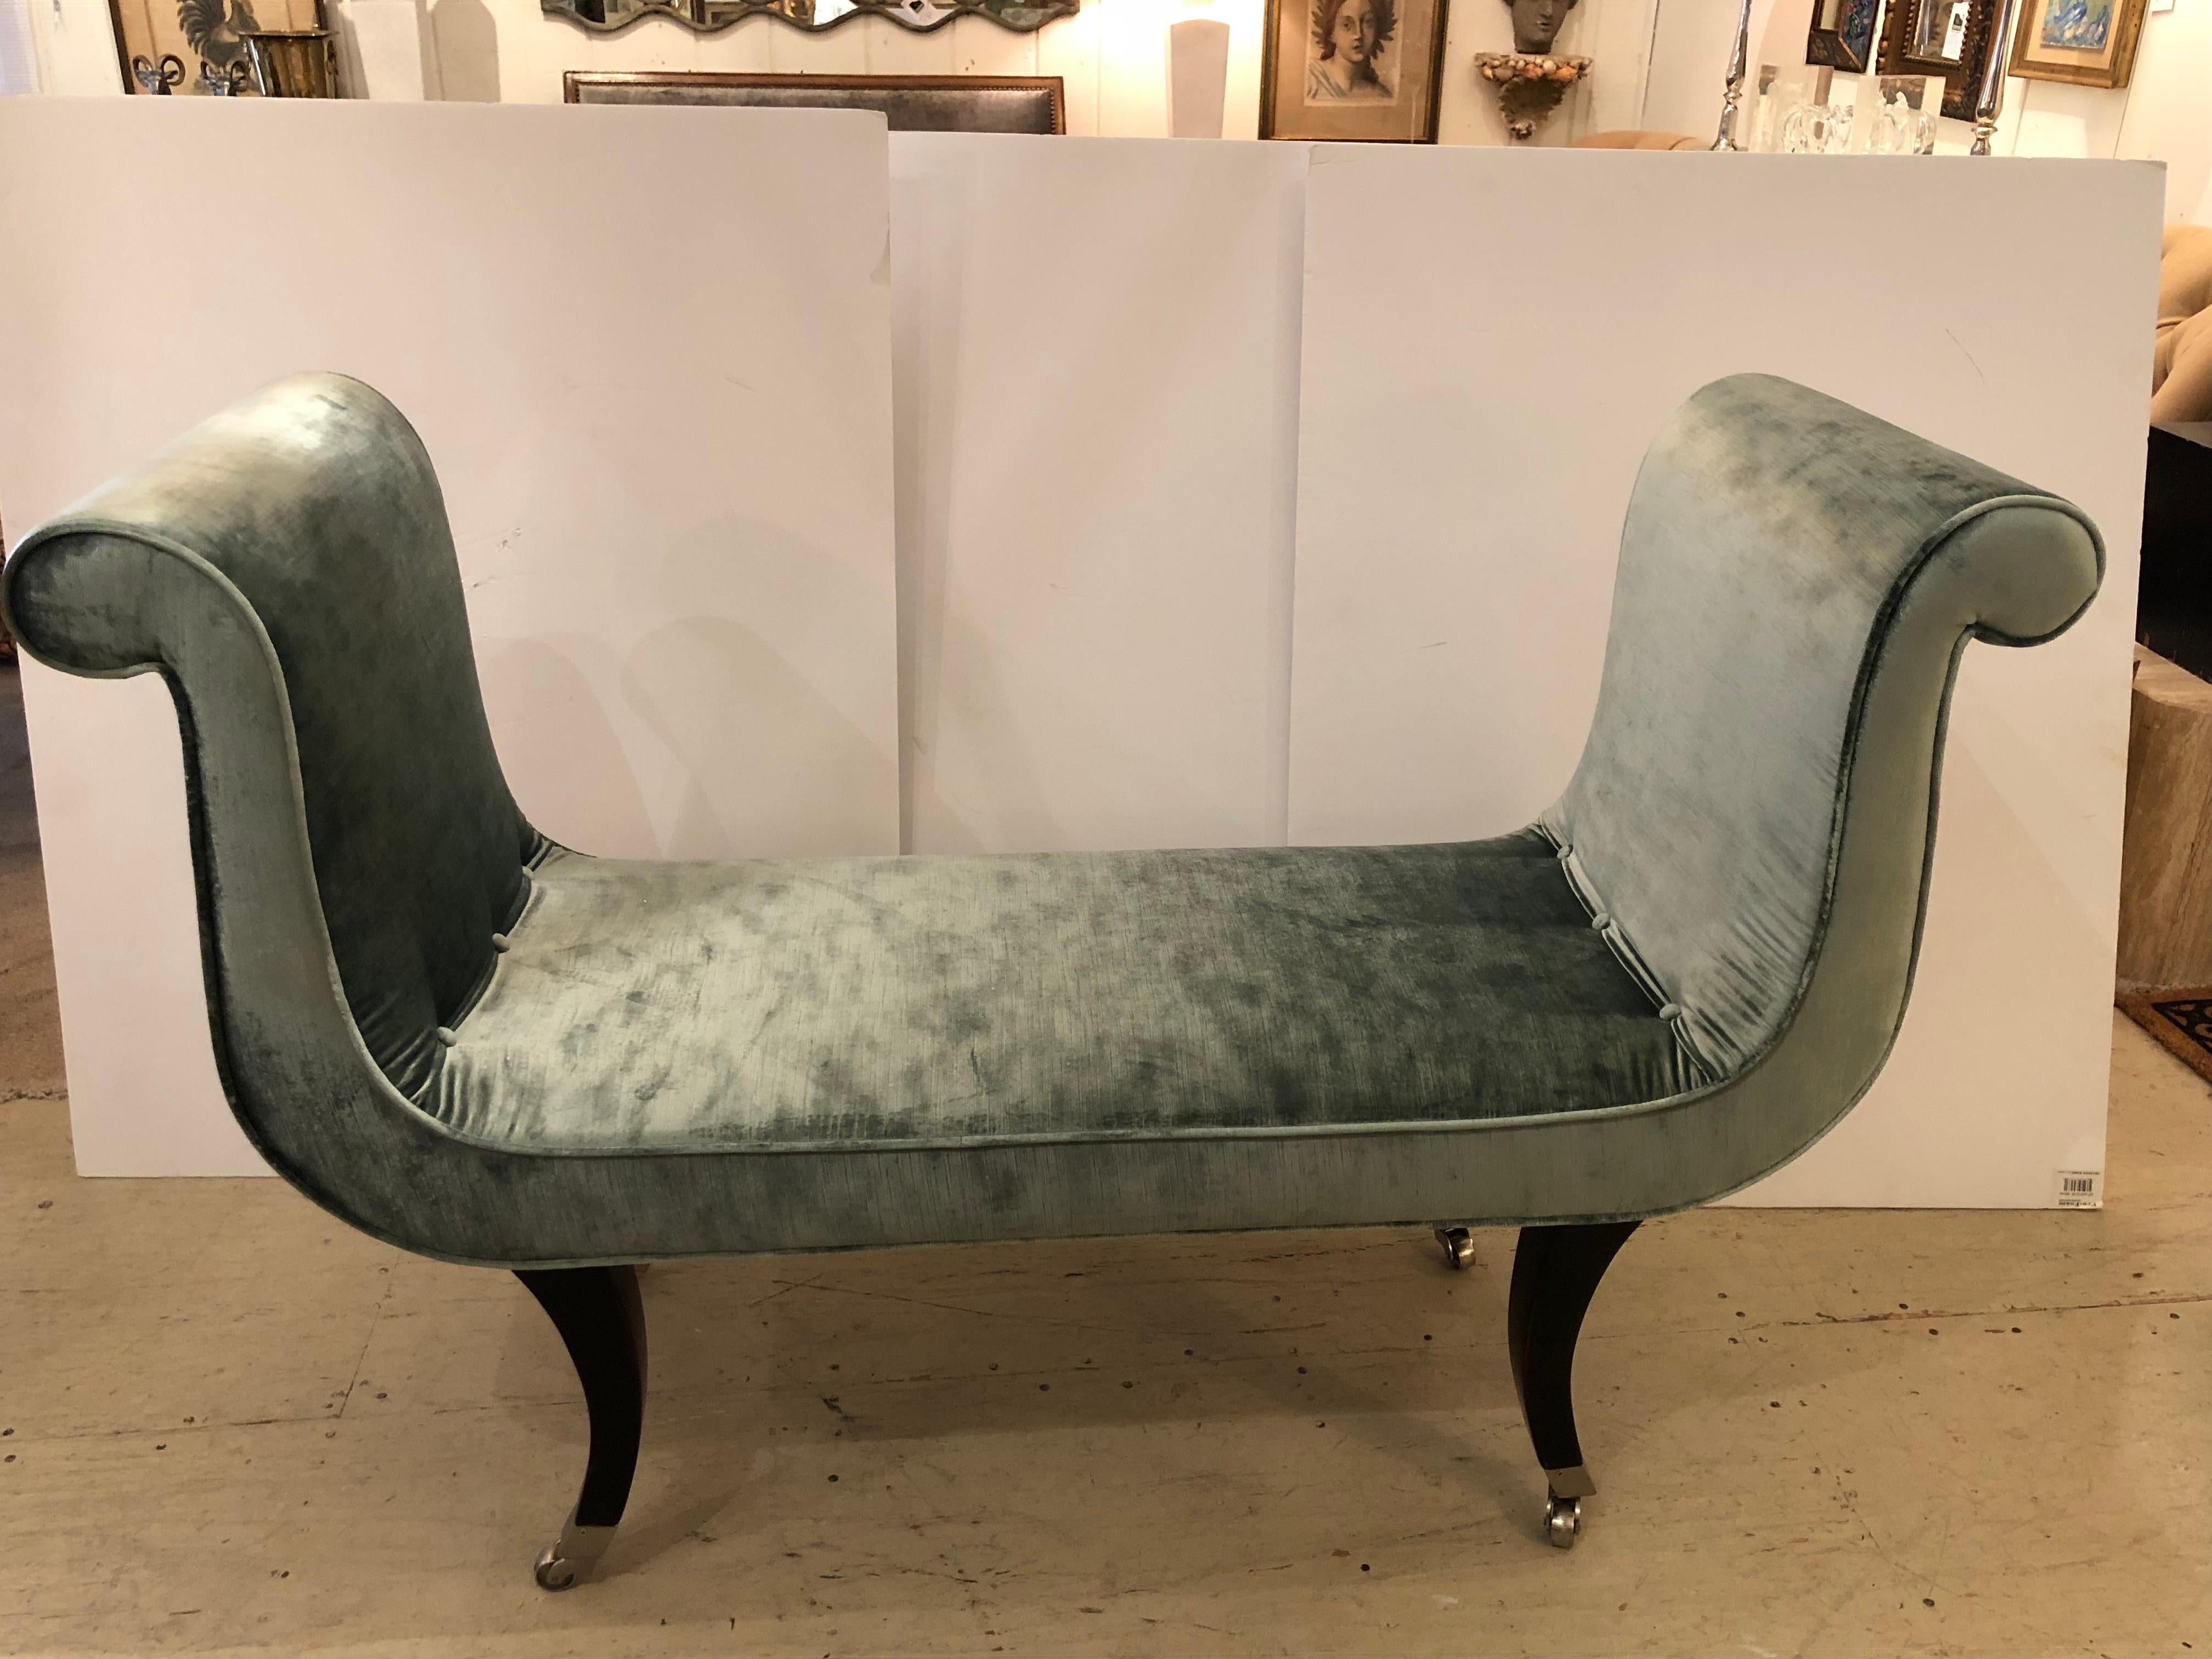 Super elegant U-form bench newly upholstered in ice blue silk velvet. The bench has scrolling arms and ebonized curved legs that terminate in nickel plated feet with casters.